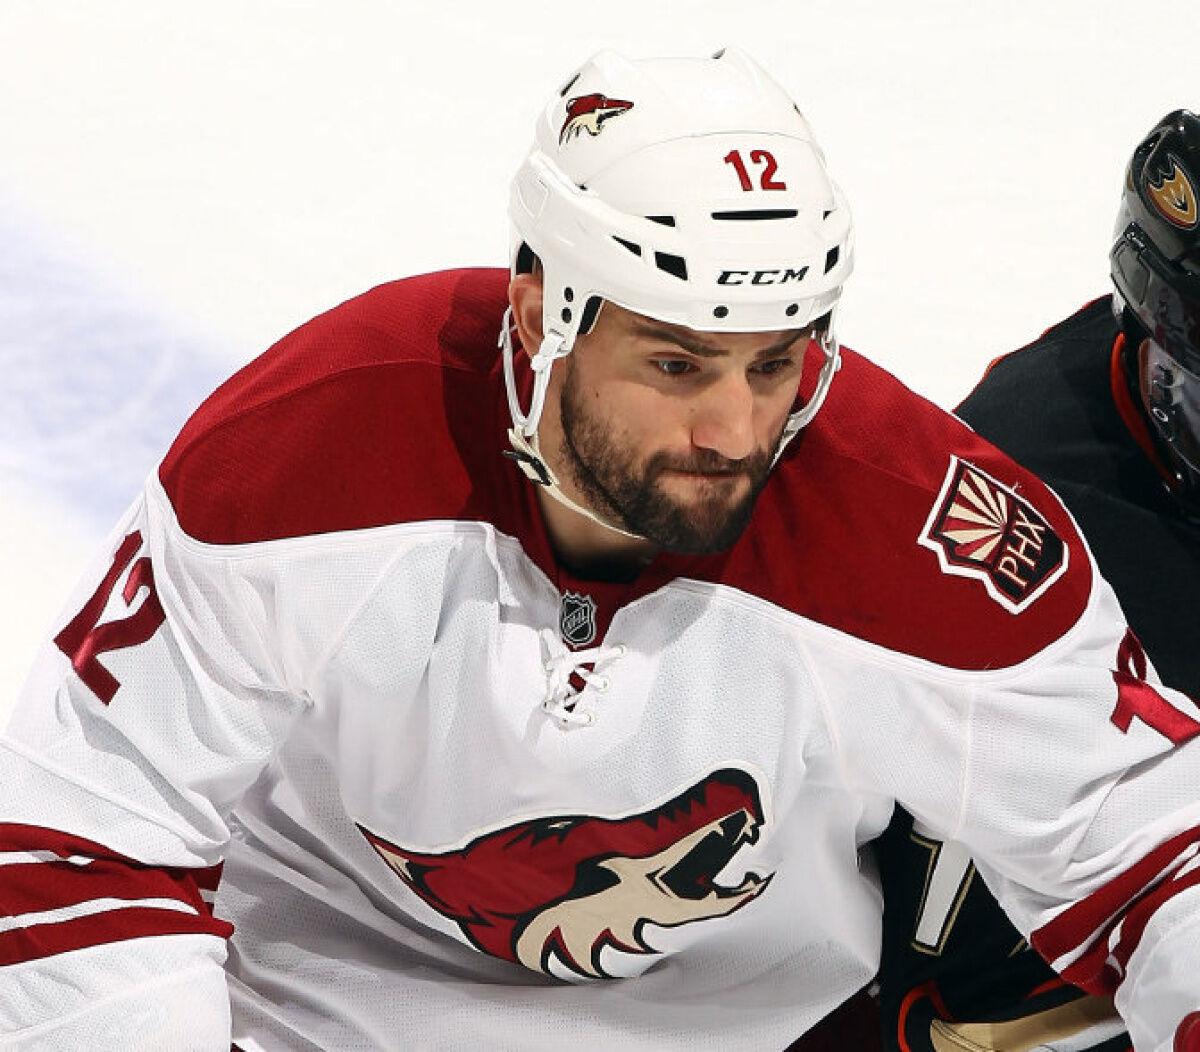 Paul Bissonnette enjoying new life as Coyotes' analyst - Sports